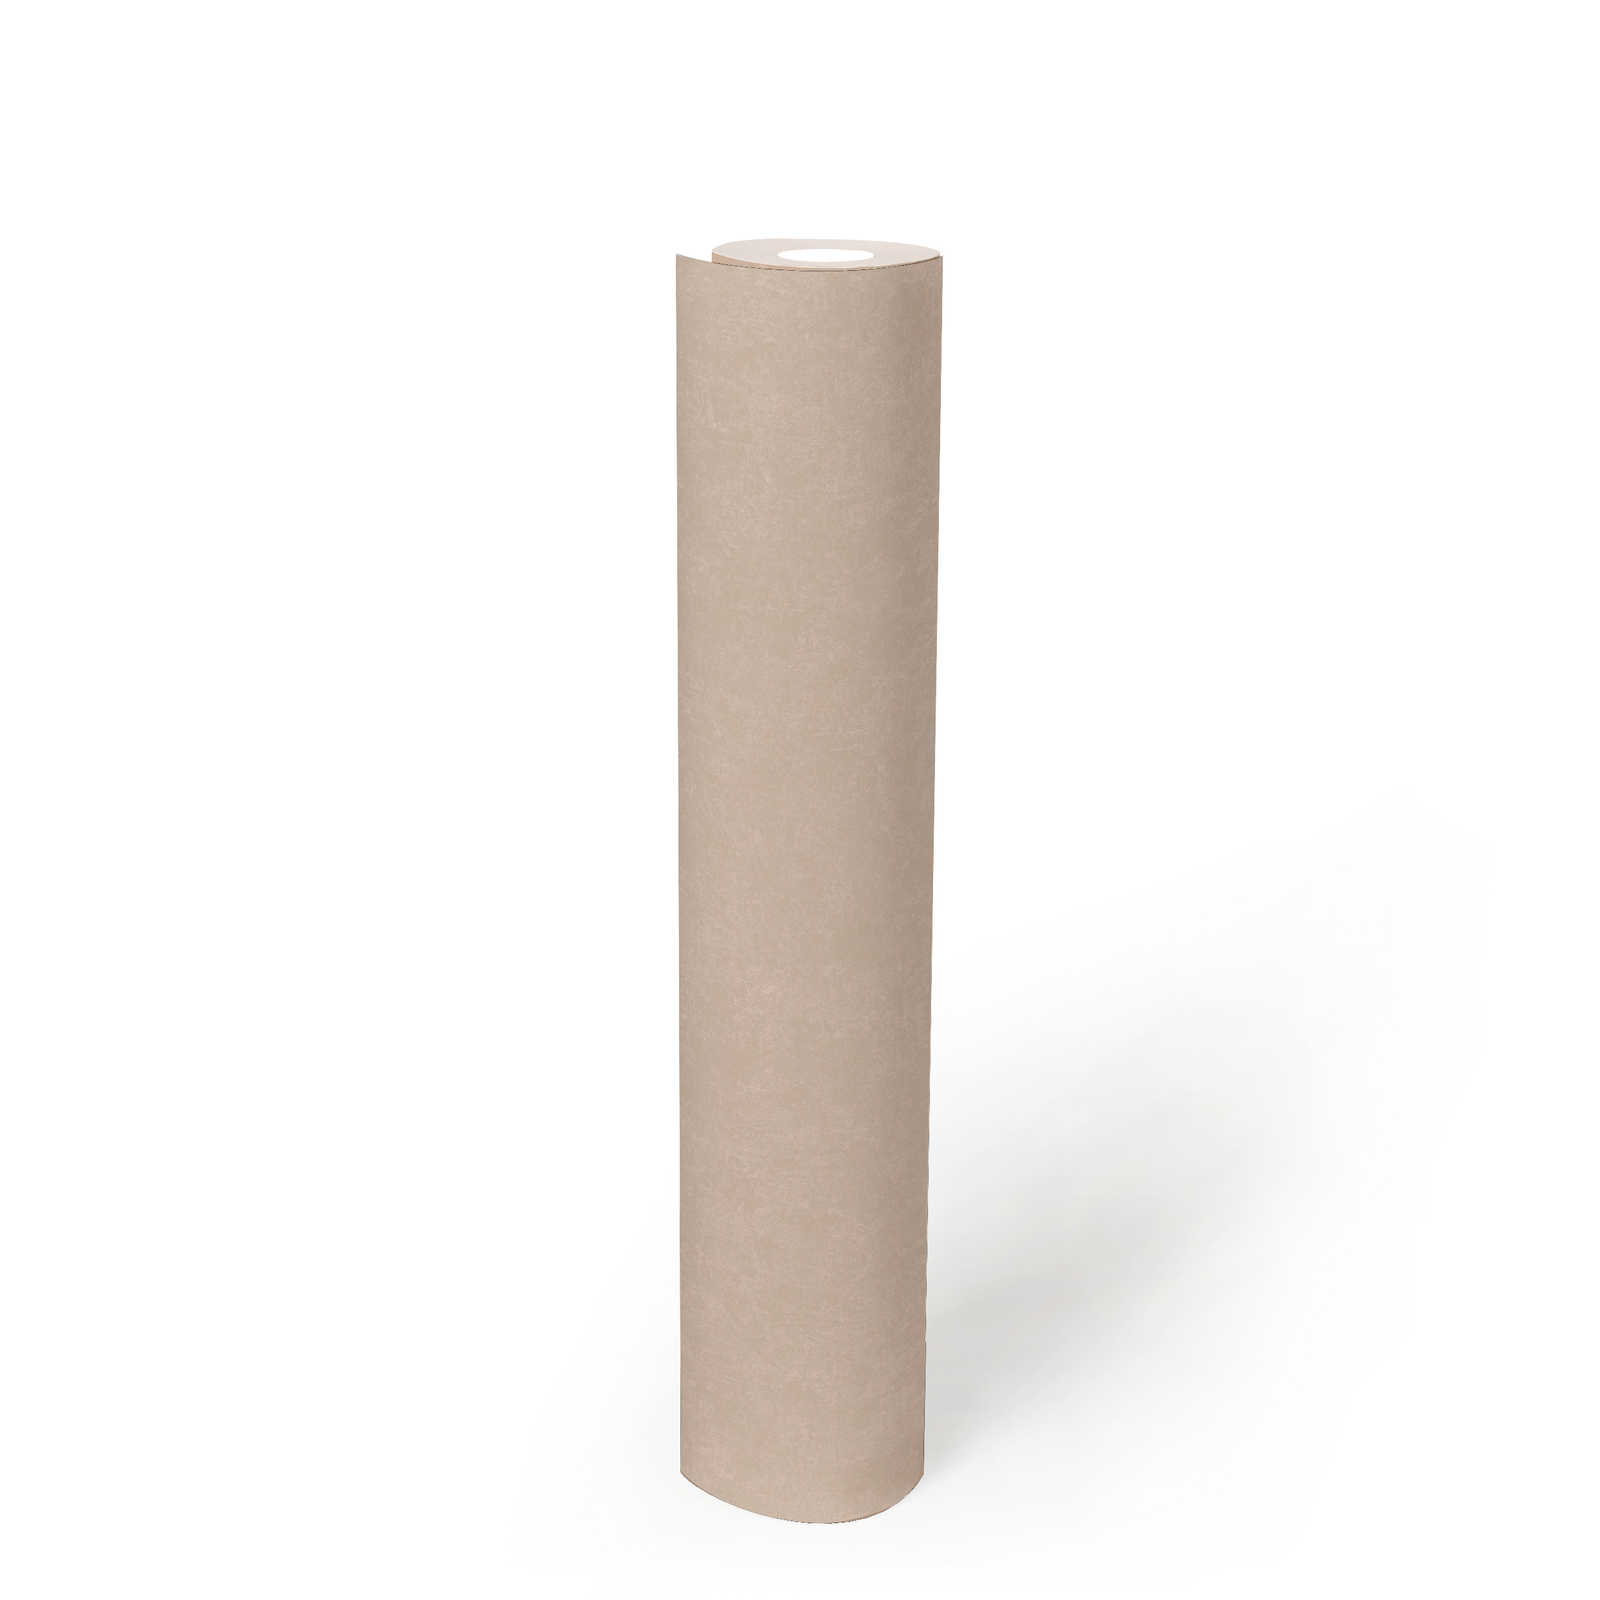             Structured wallpaper beige-pink with non-woven backing - pink
        